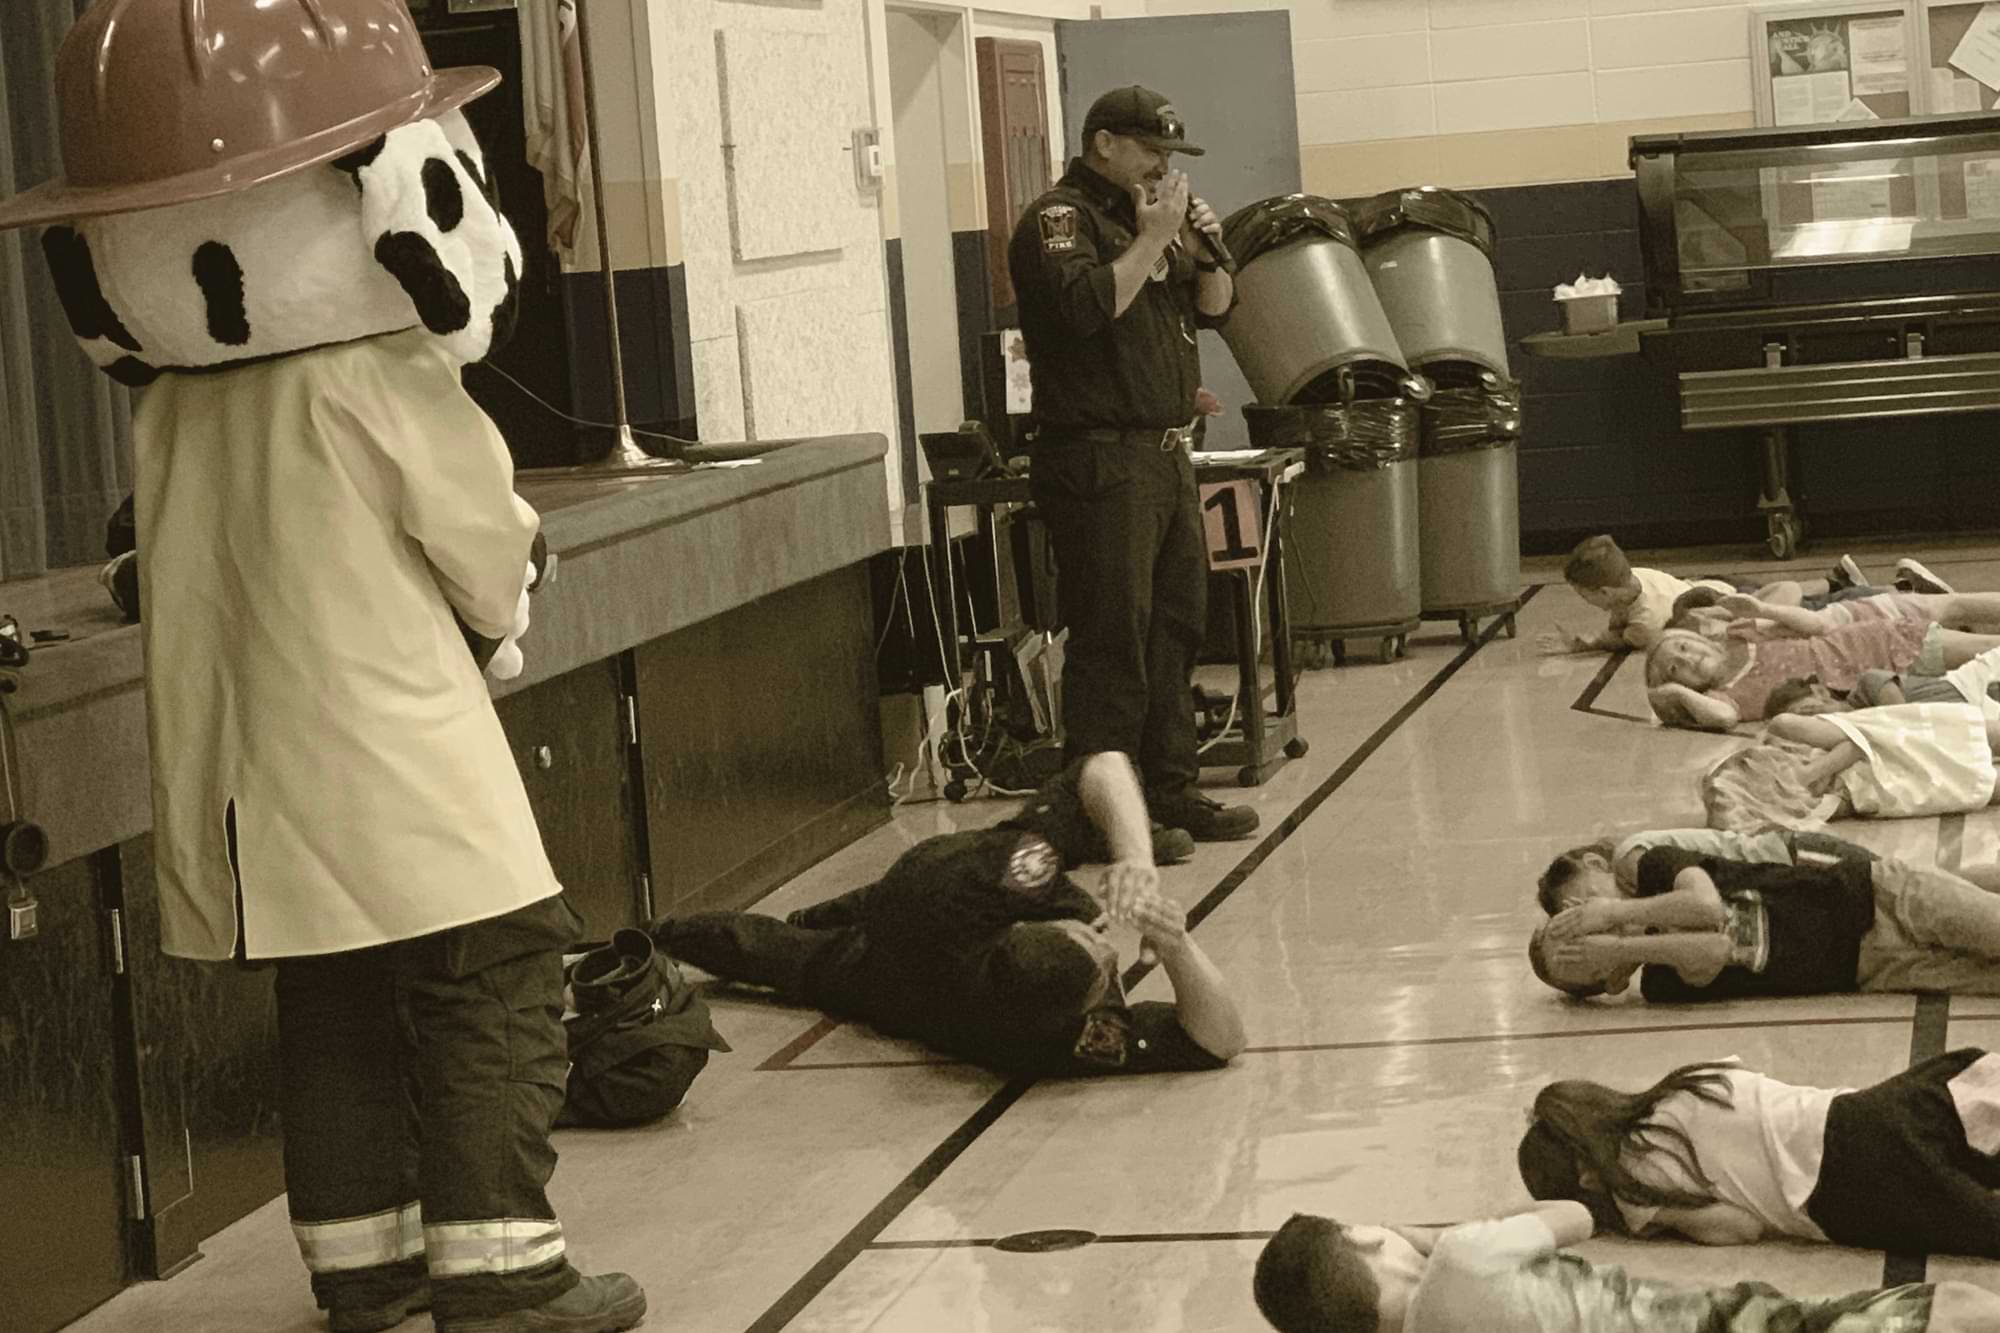 Firefighters teaching students safety drills in school auditorium